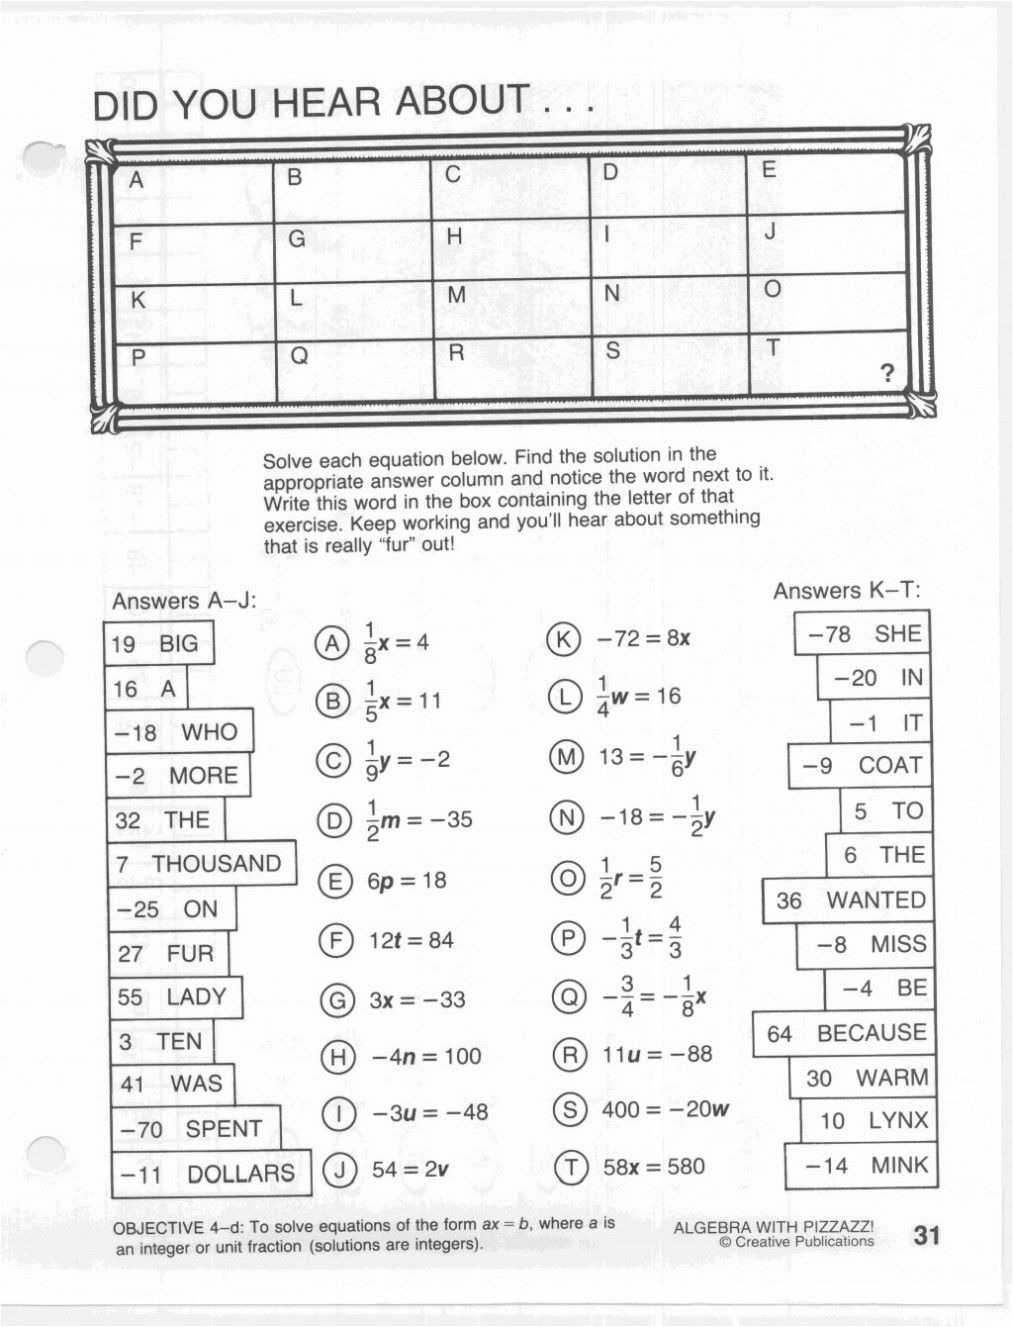 cryptic-quiz-math-worksheet-answers-db-excel